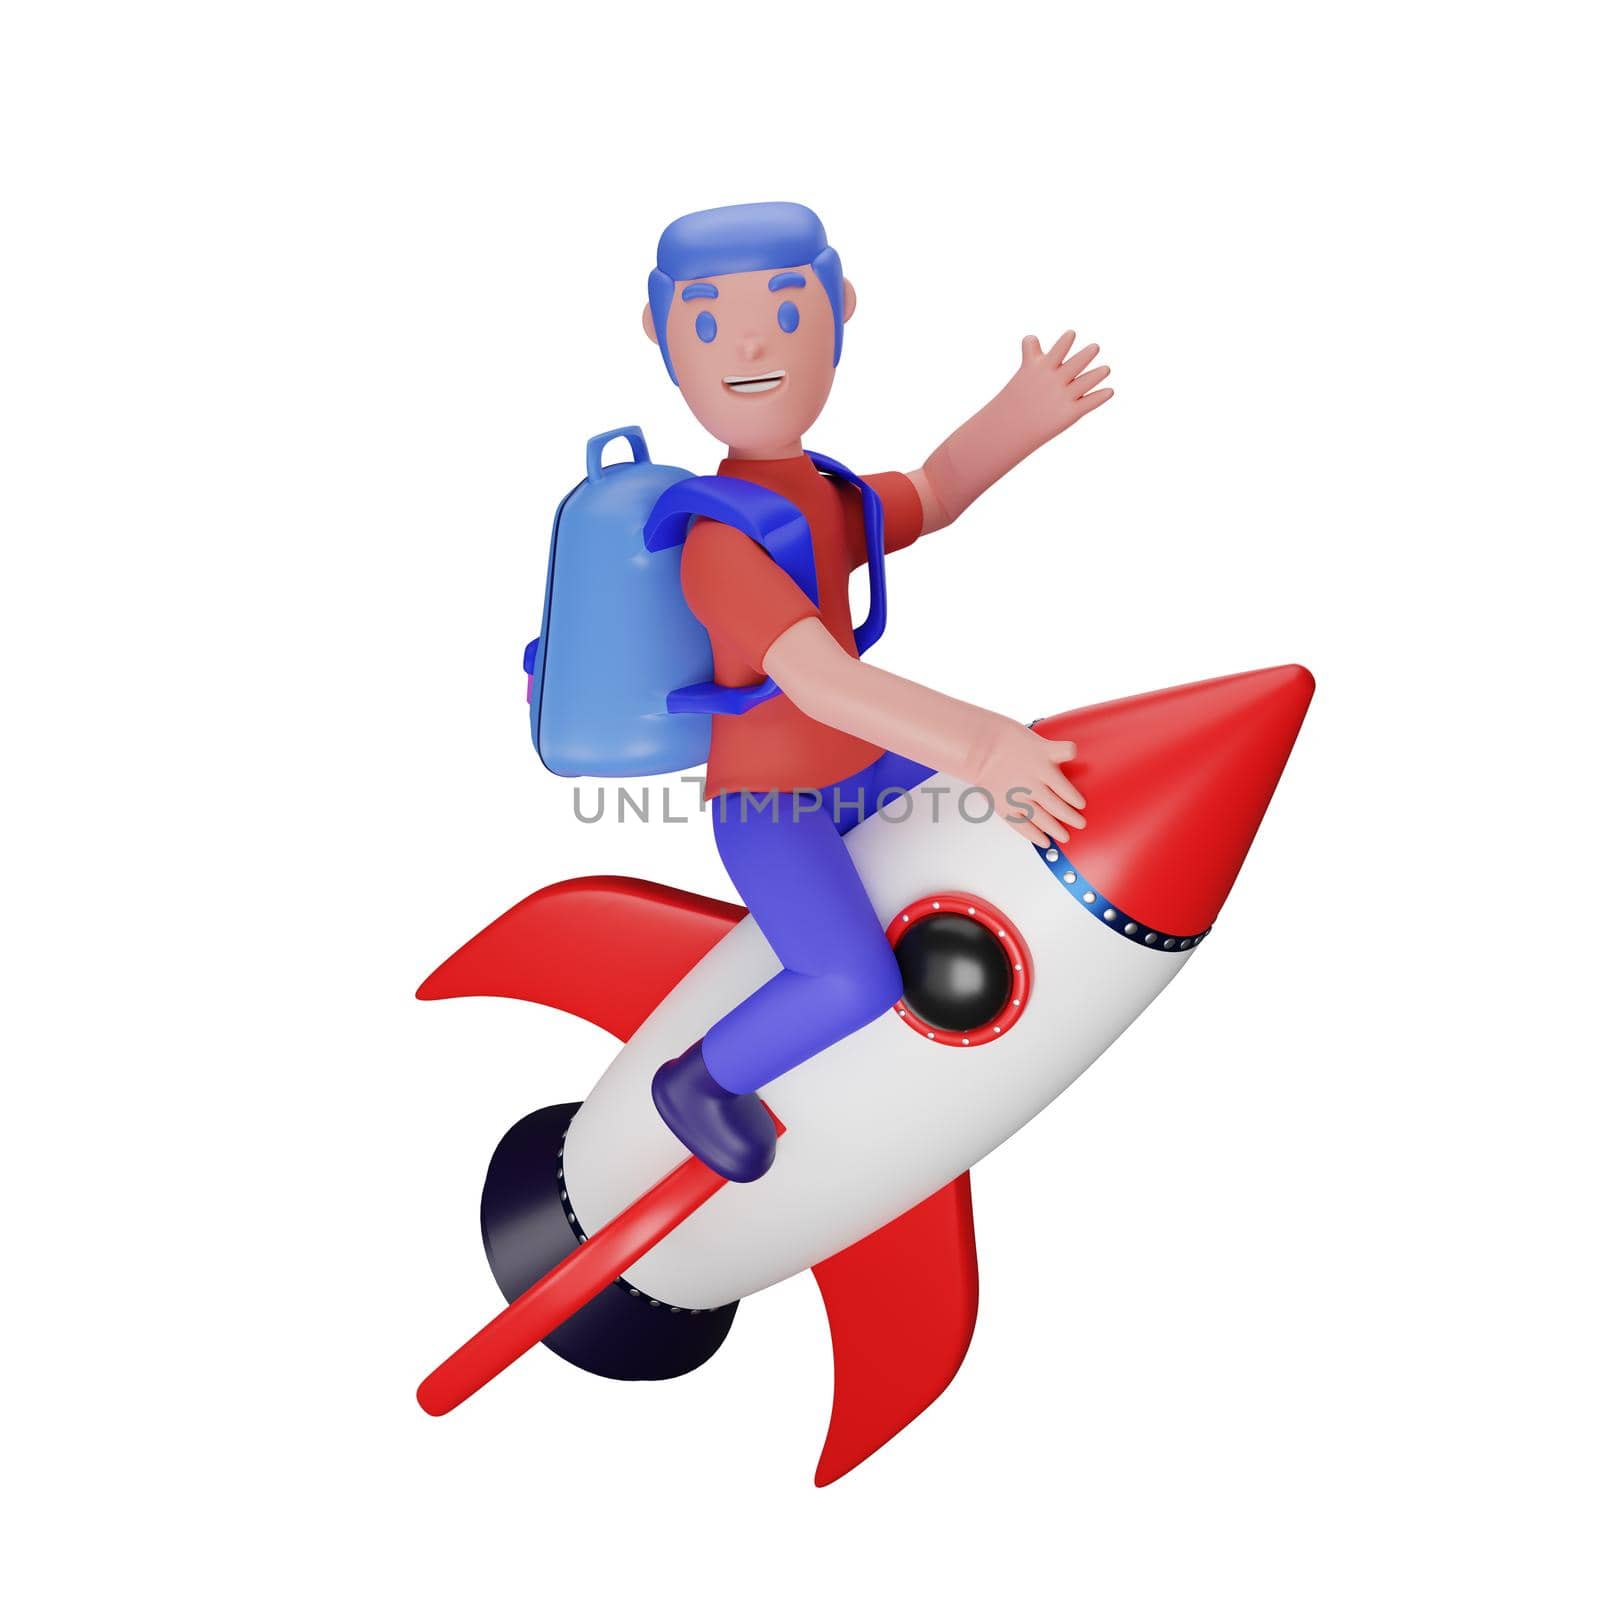 3d rendering of a character riding a rocket with a back to school concept